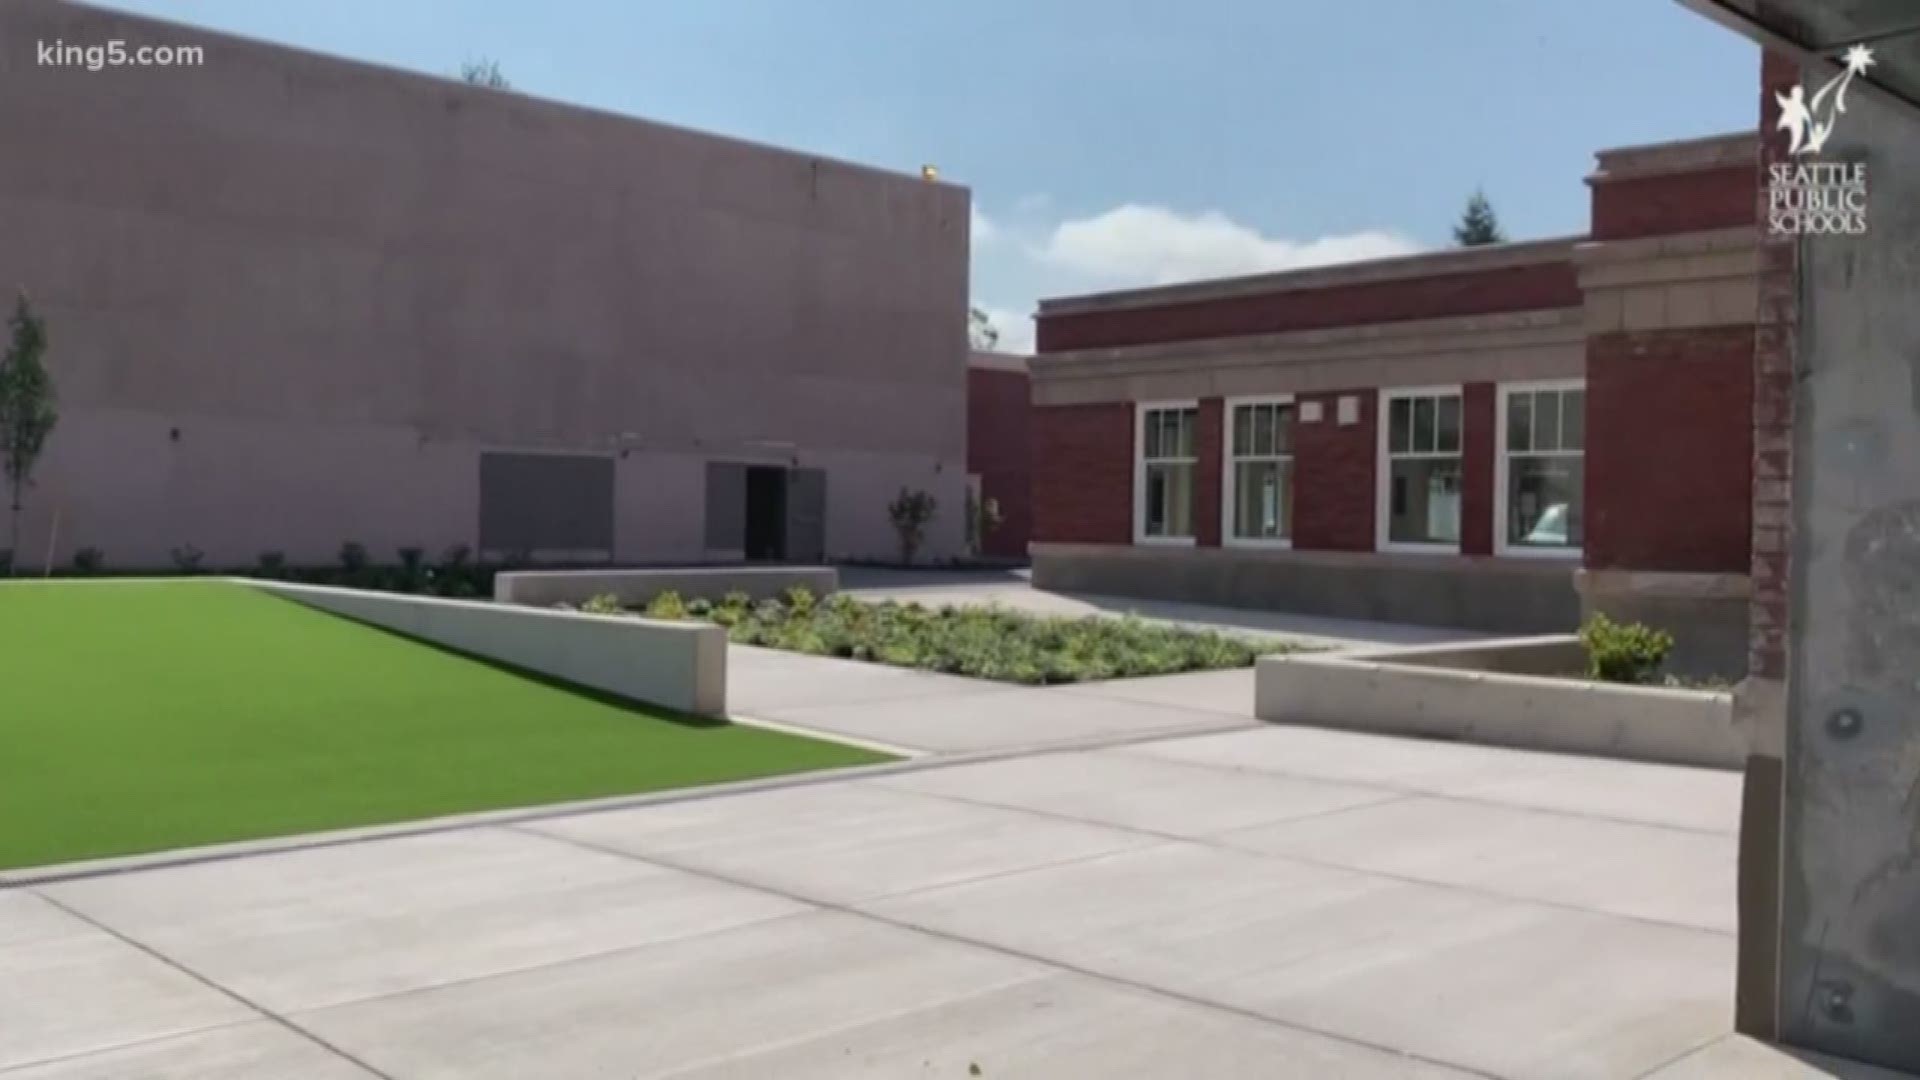 Students across Western Washington will walk into new schools this week. Growth across the area has caused at least two school districts to build new buildings to meet the need.